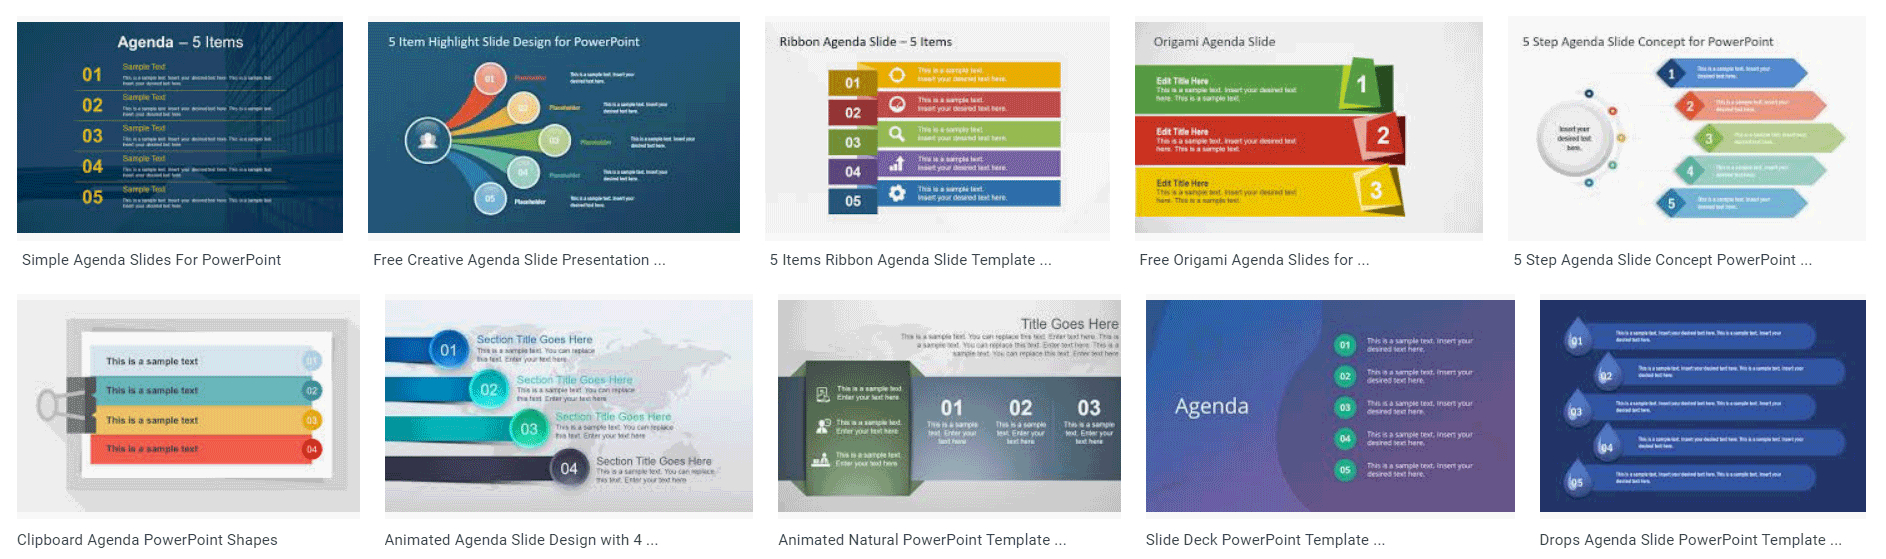 Best Agenda Slide Templates For Powerpoint within dimensions 1886 X 559